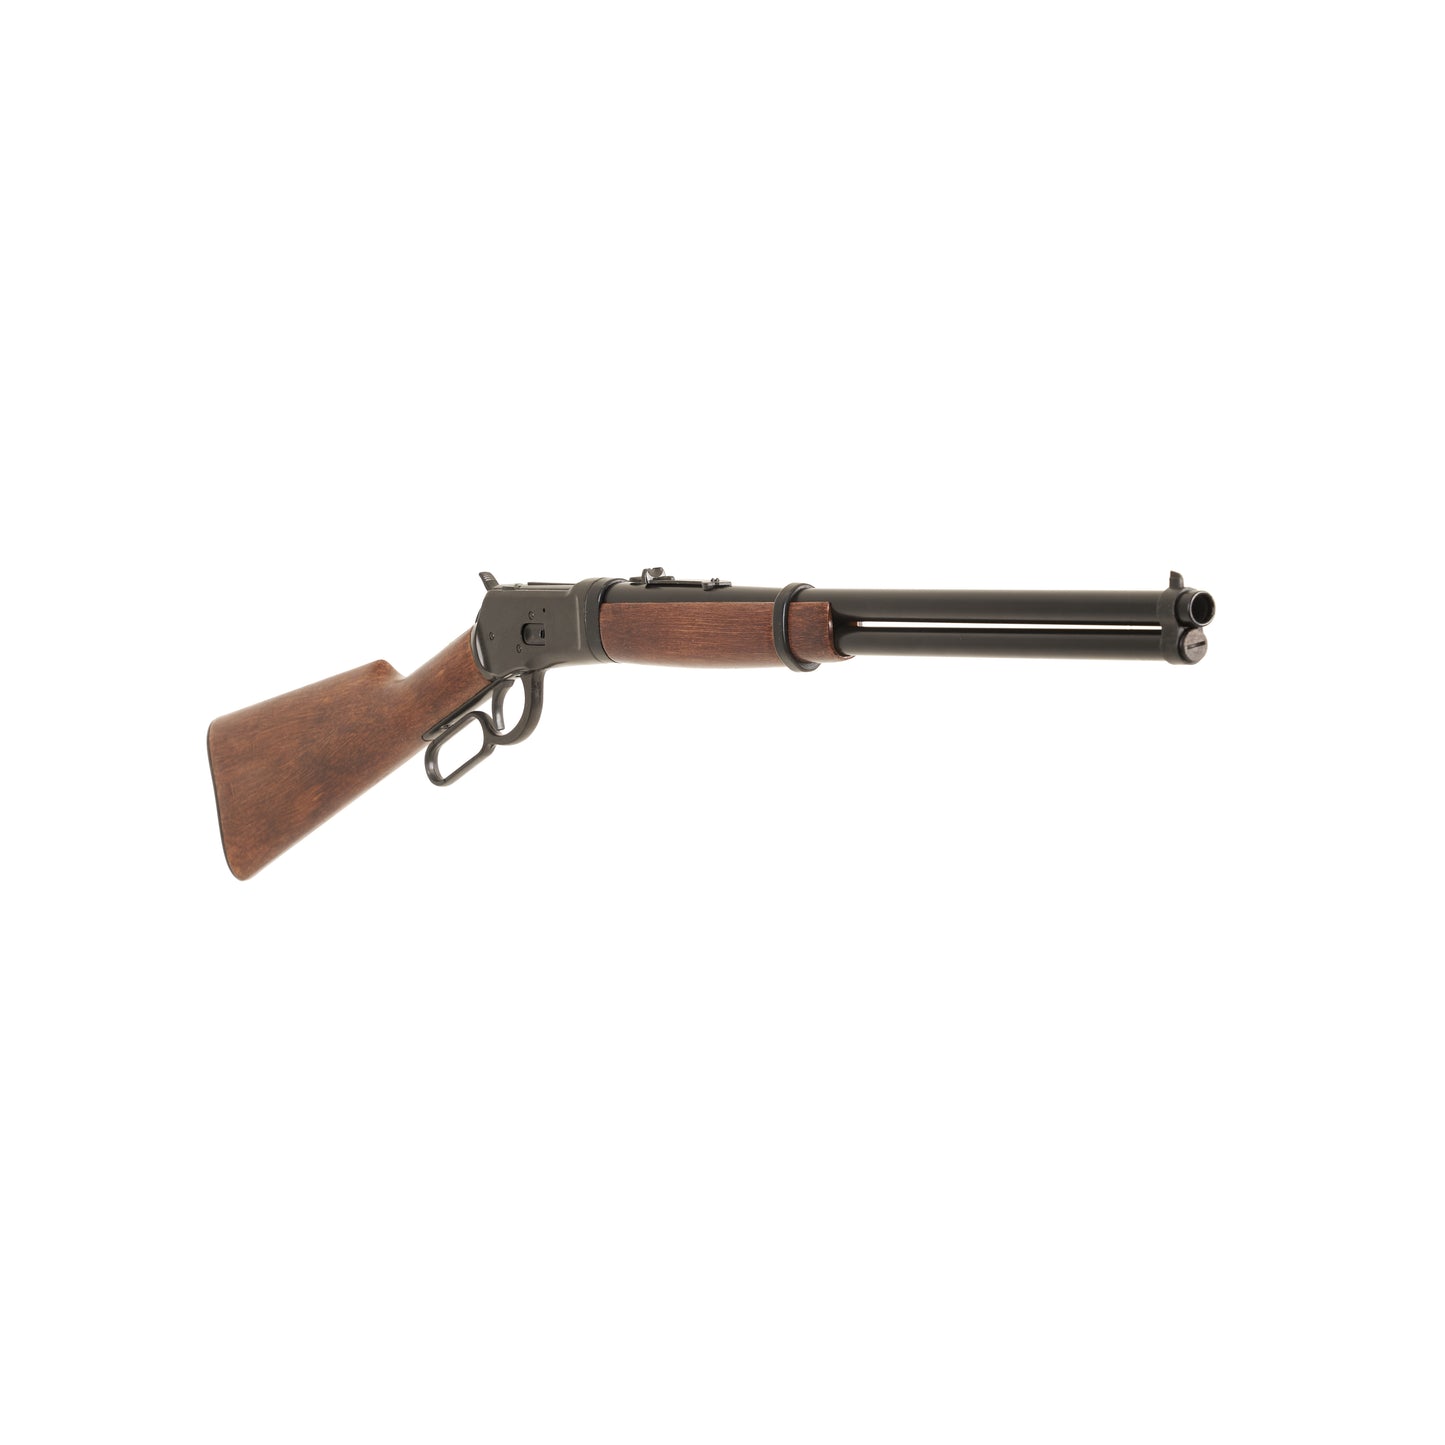 Front view of Replica 1892 Old West Rifle with wooden stock and black fittings and barrel.